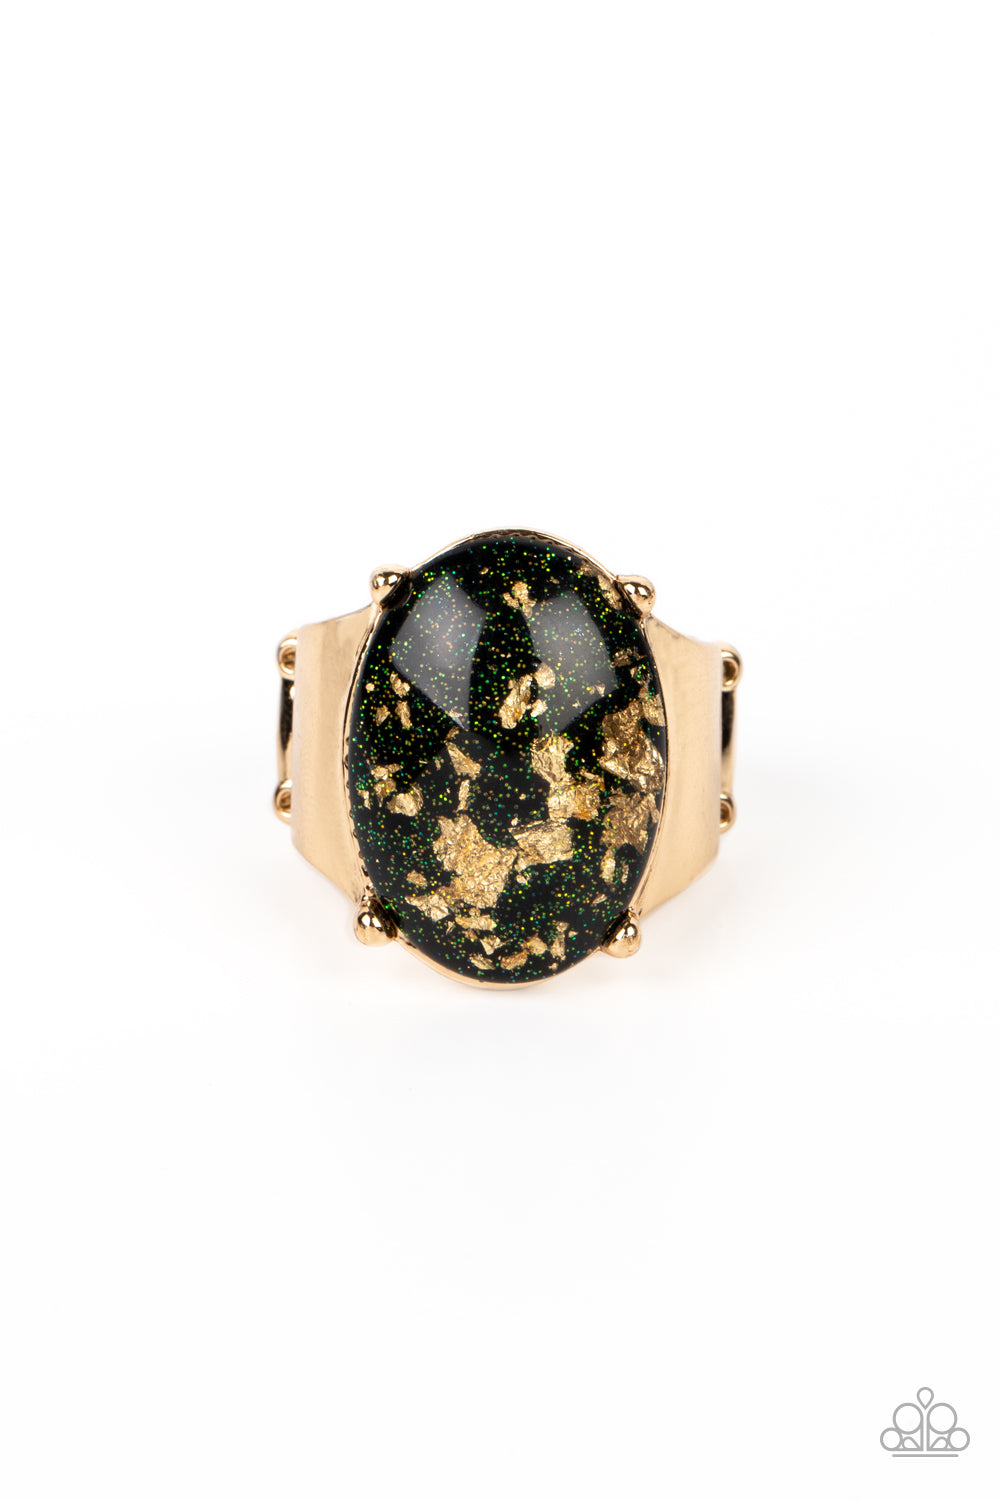 Gold Leaf Glam Black Ring - Paparazzi Accessories  Encased in a sleek gold frame, an oversized glassy black bead with an opalescent finish, is speckled in flecks of gold shimmer for a bubbly, yet glitzy effect. Thick, sleek, gold curves from the glassy bead, anchoring the oversized shimmer to the design. Features a stretchy band for a flexible fit.  Sold as one individual ring.